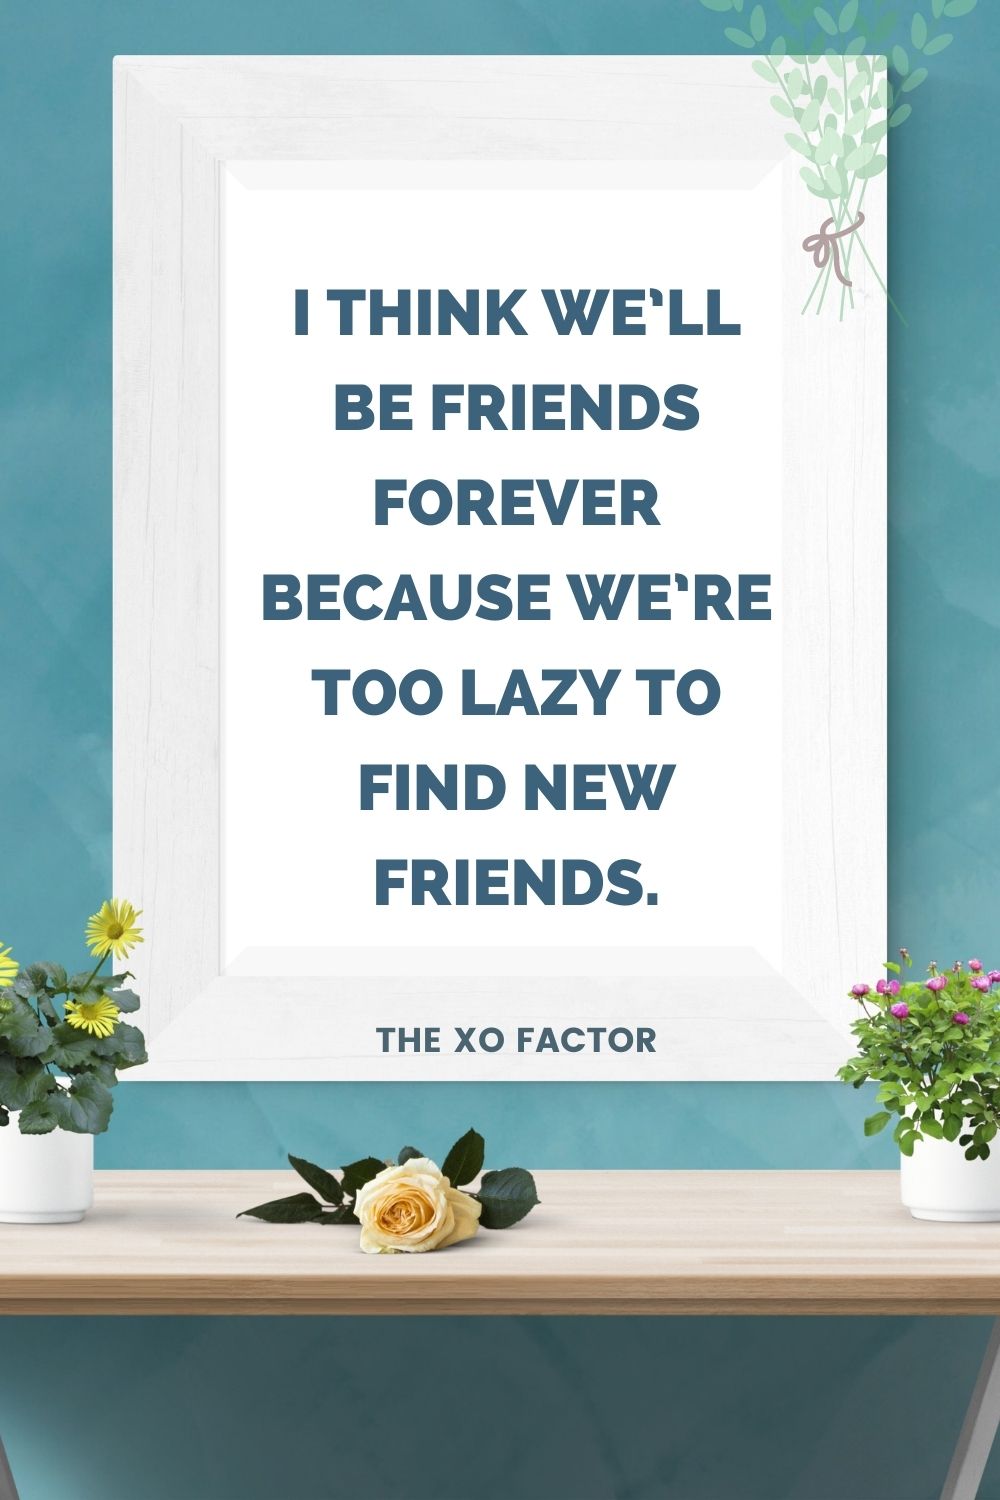 I think we’ll be friends forever because we’re too lazy to find new friends.